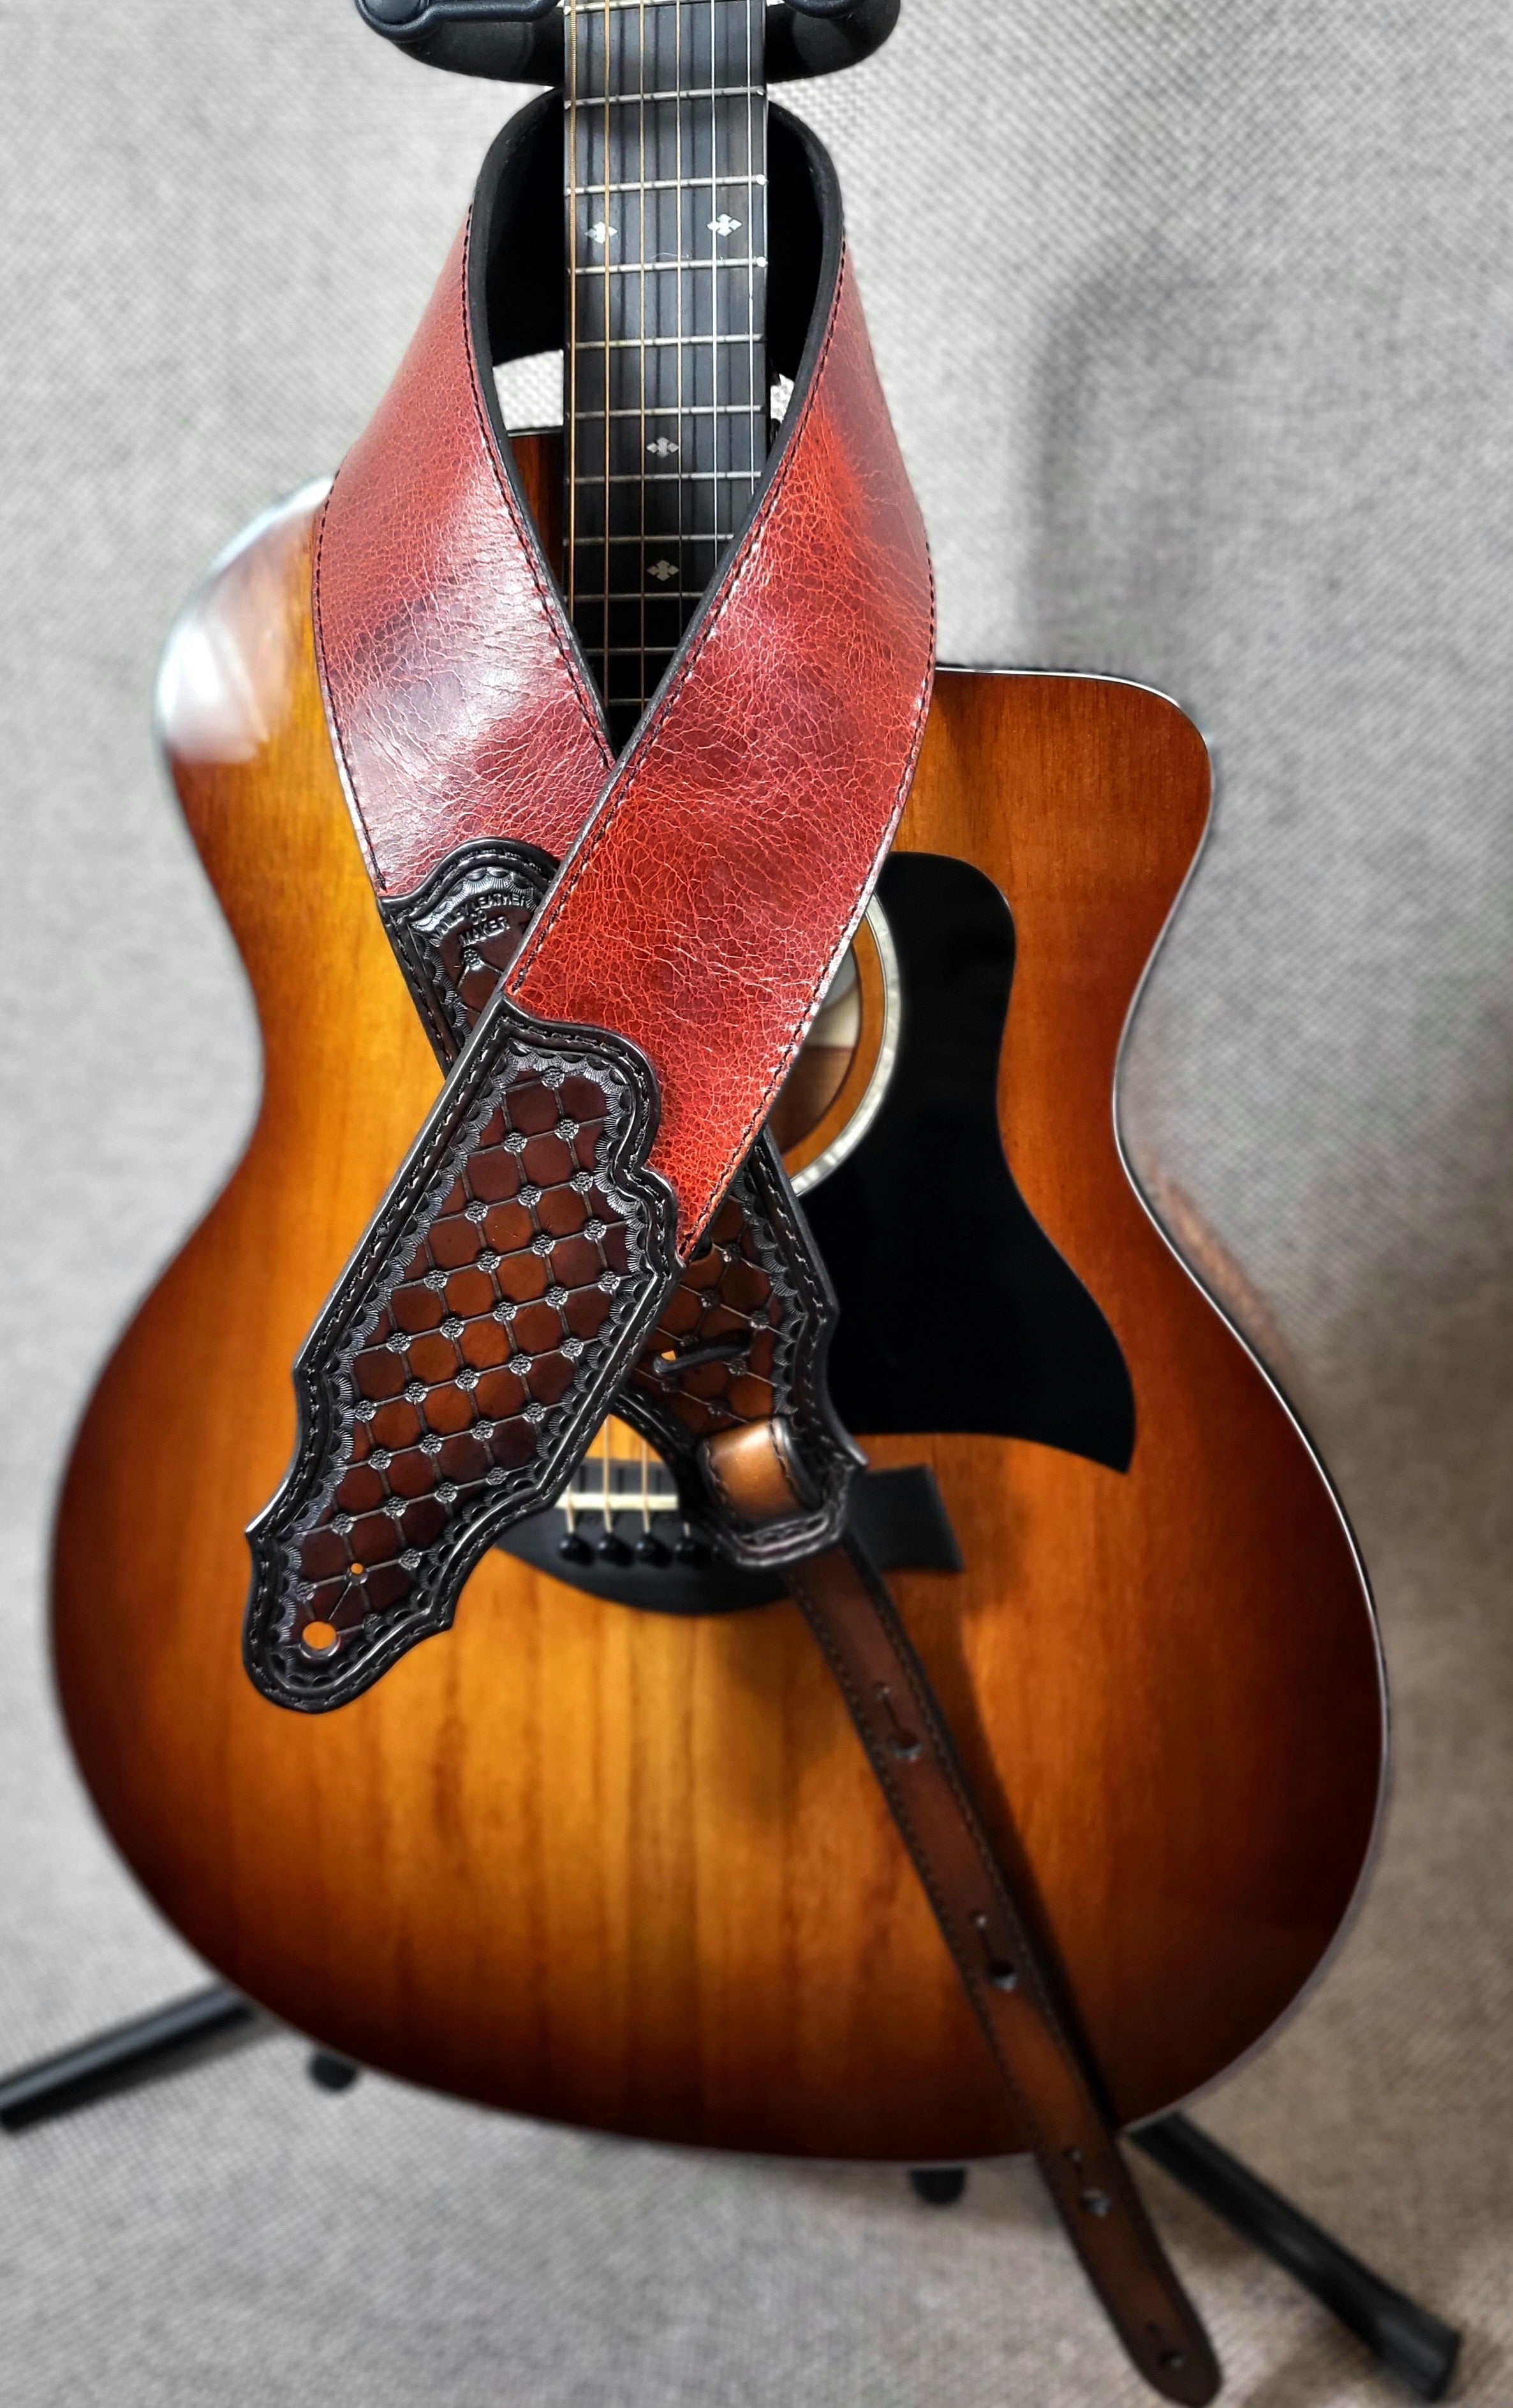 This guitar strap is a Tandy Leather kit that comes plain veg